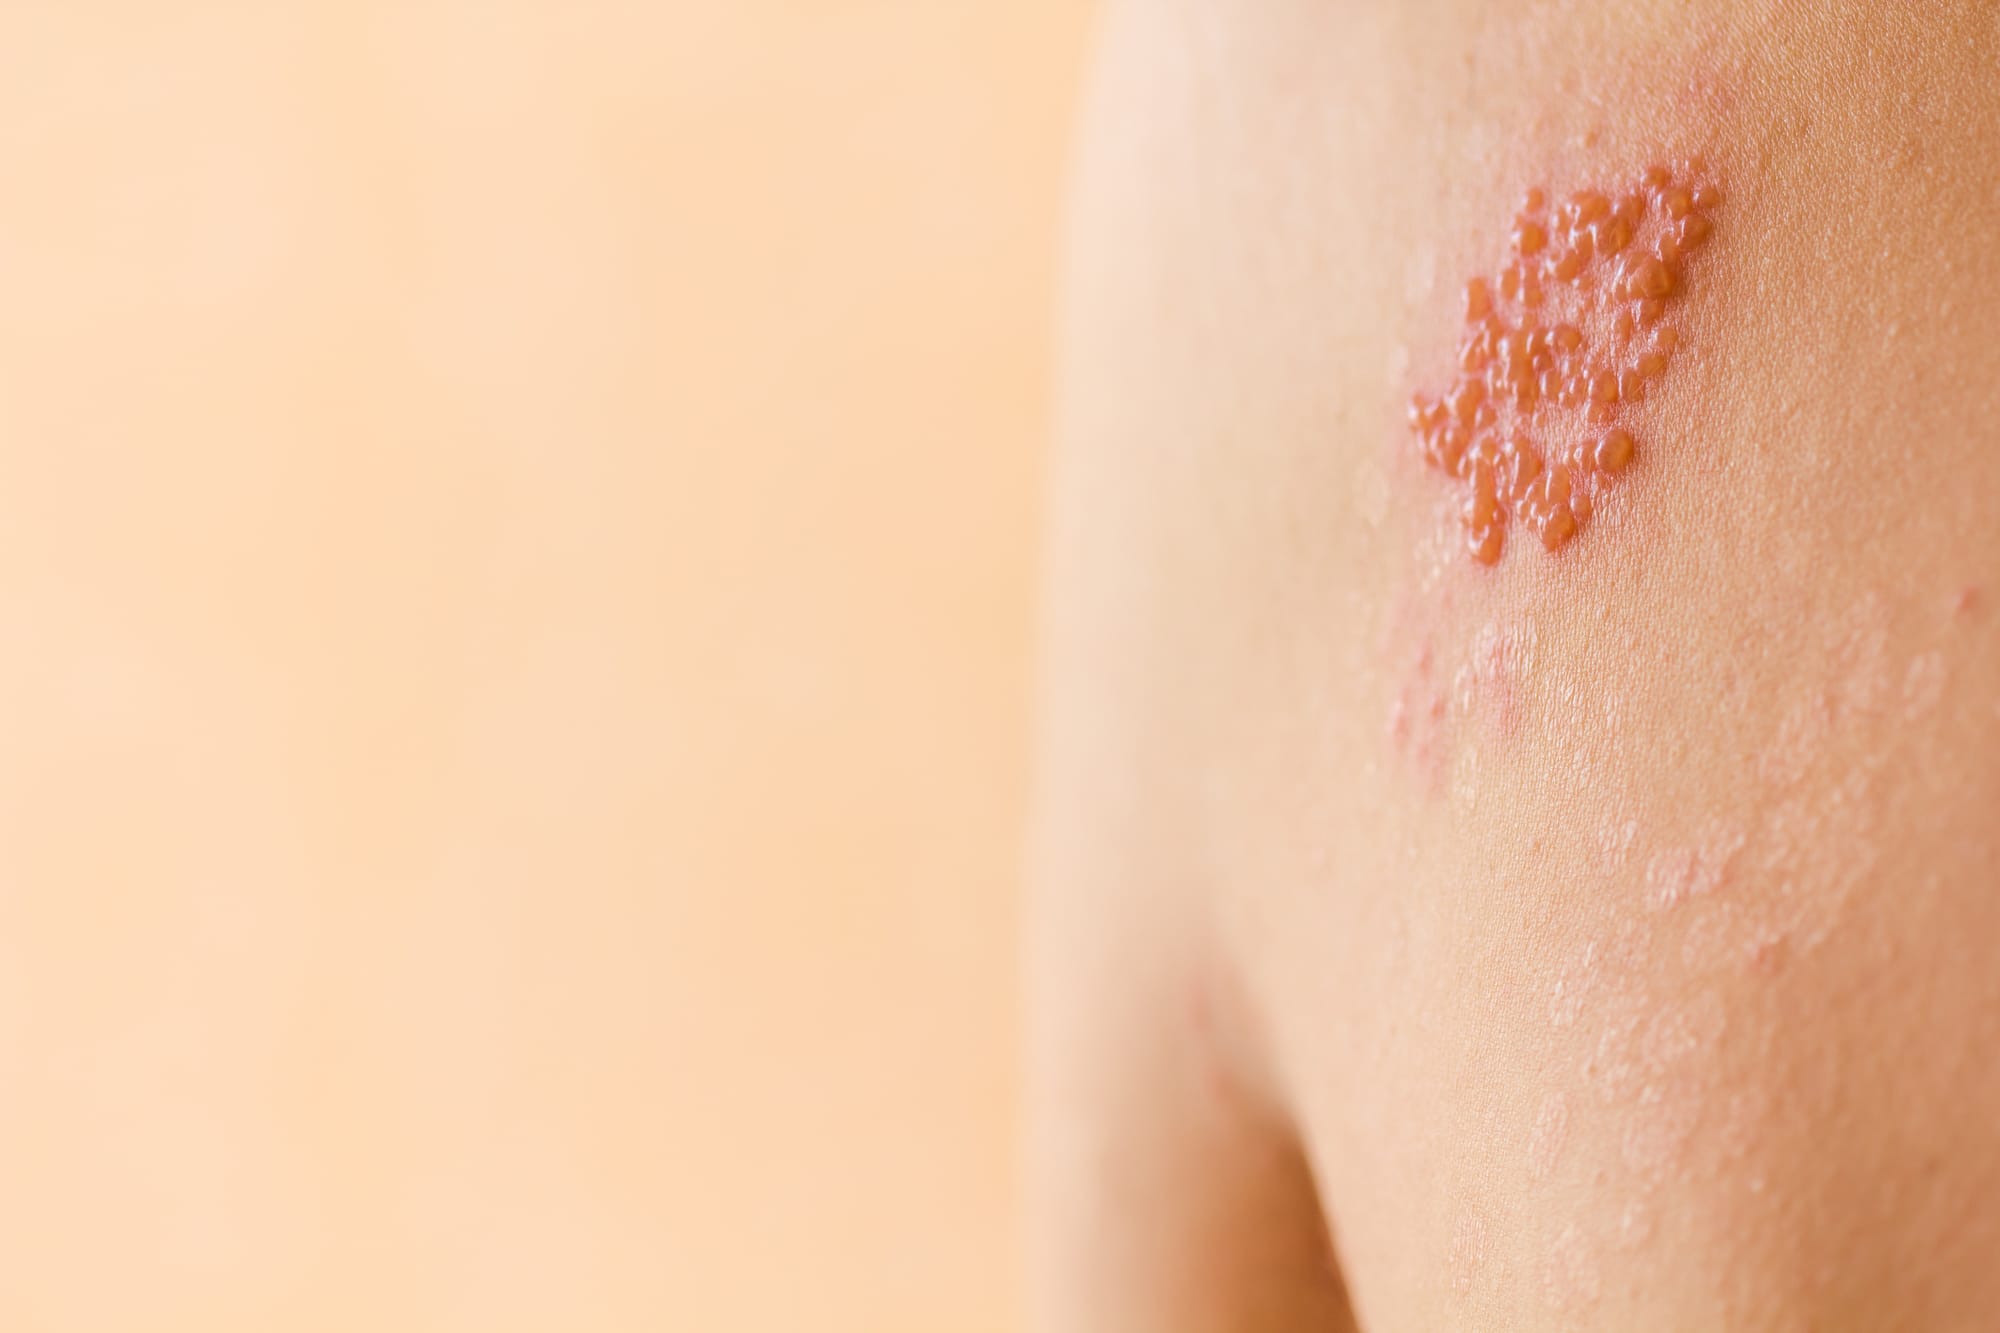 Shingles are not just a band of blisters